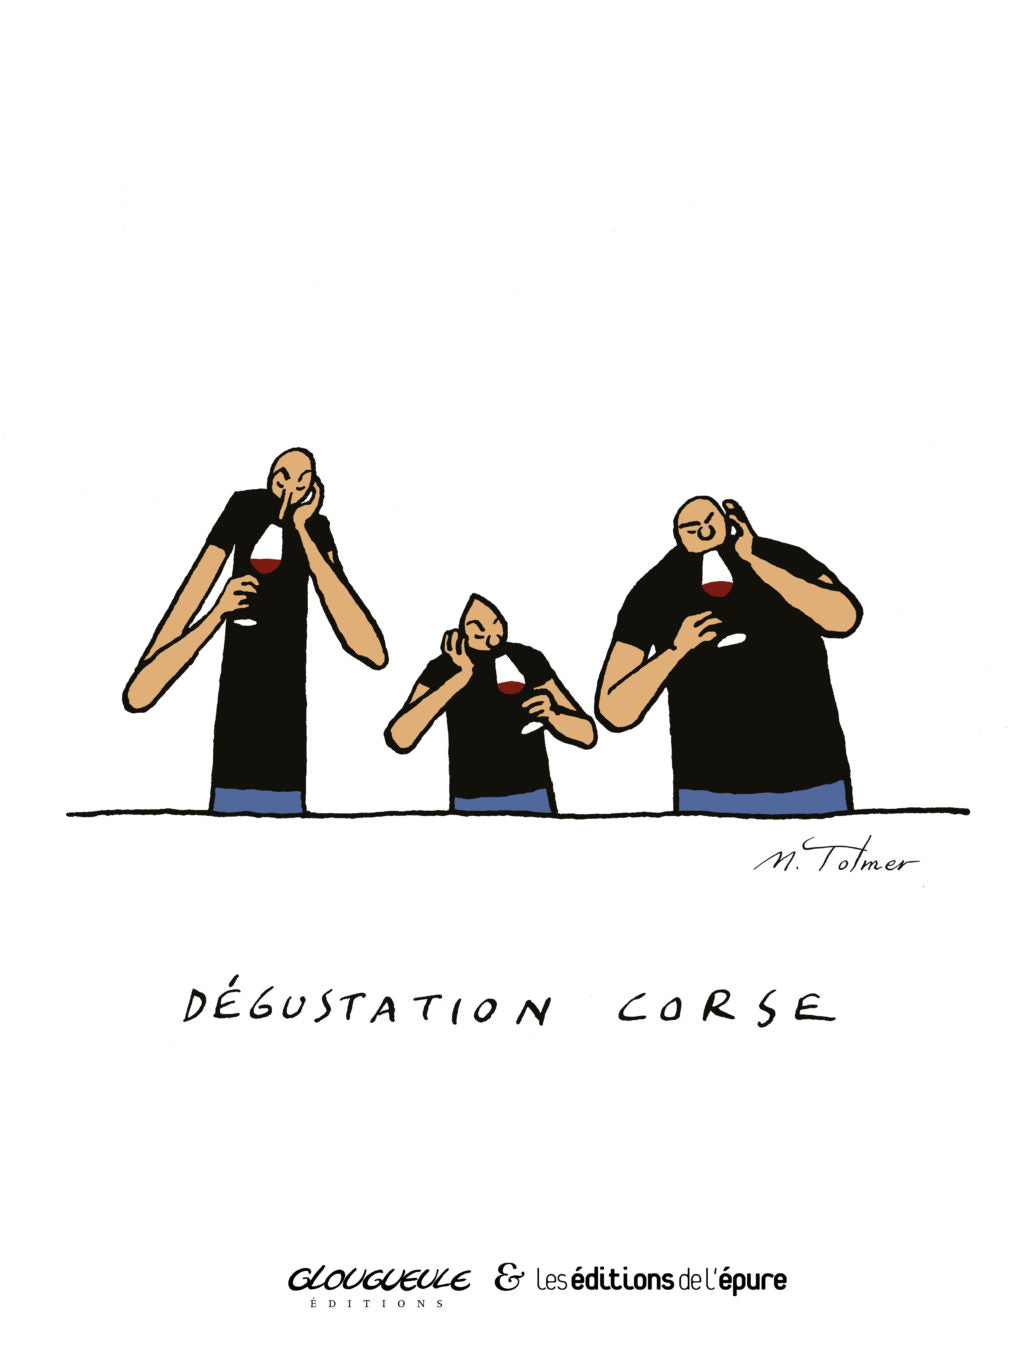 Dégustation corse by Michel Tolmer 30x40cm Poster